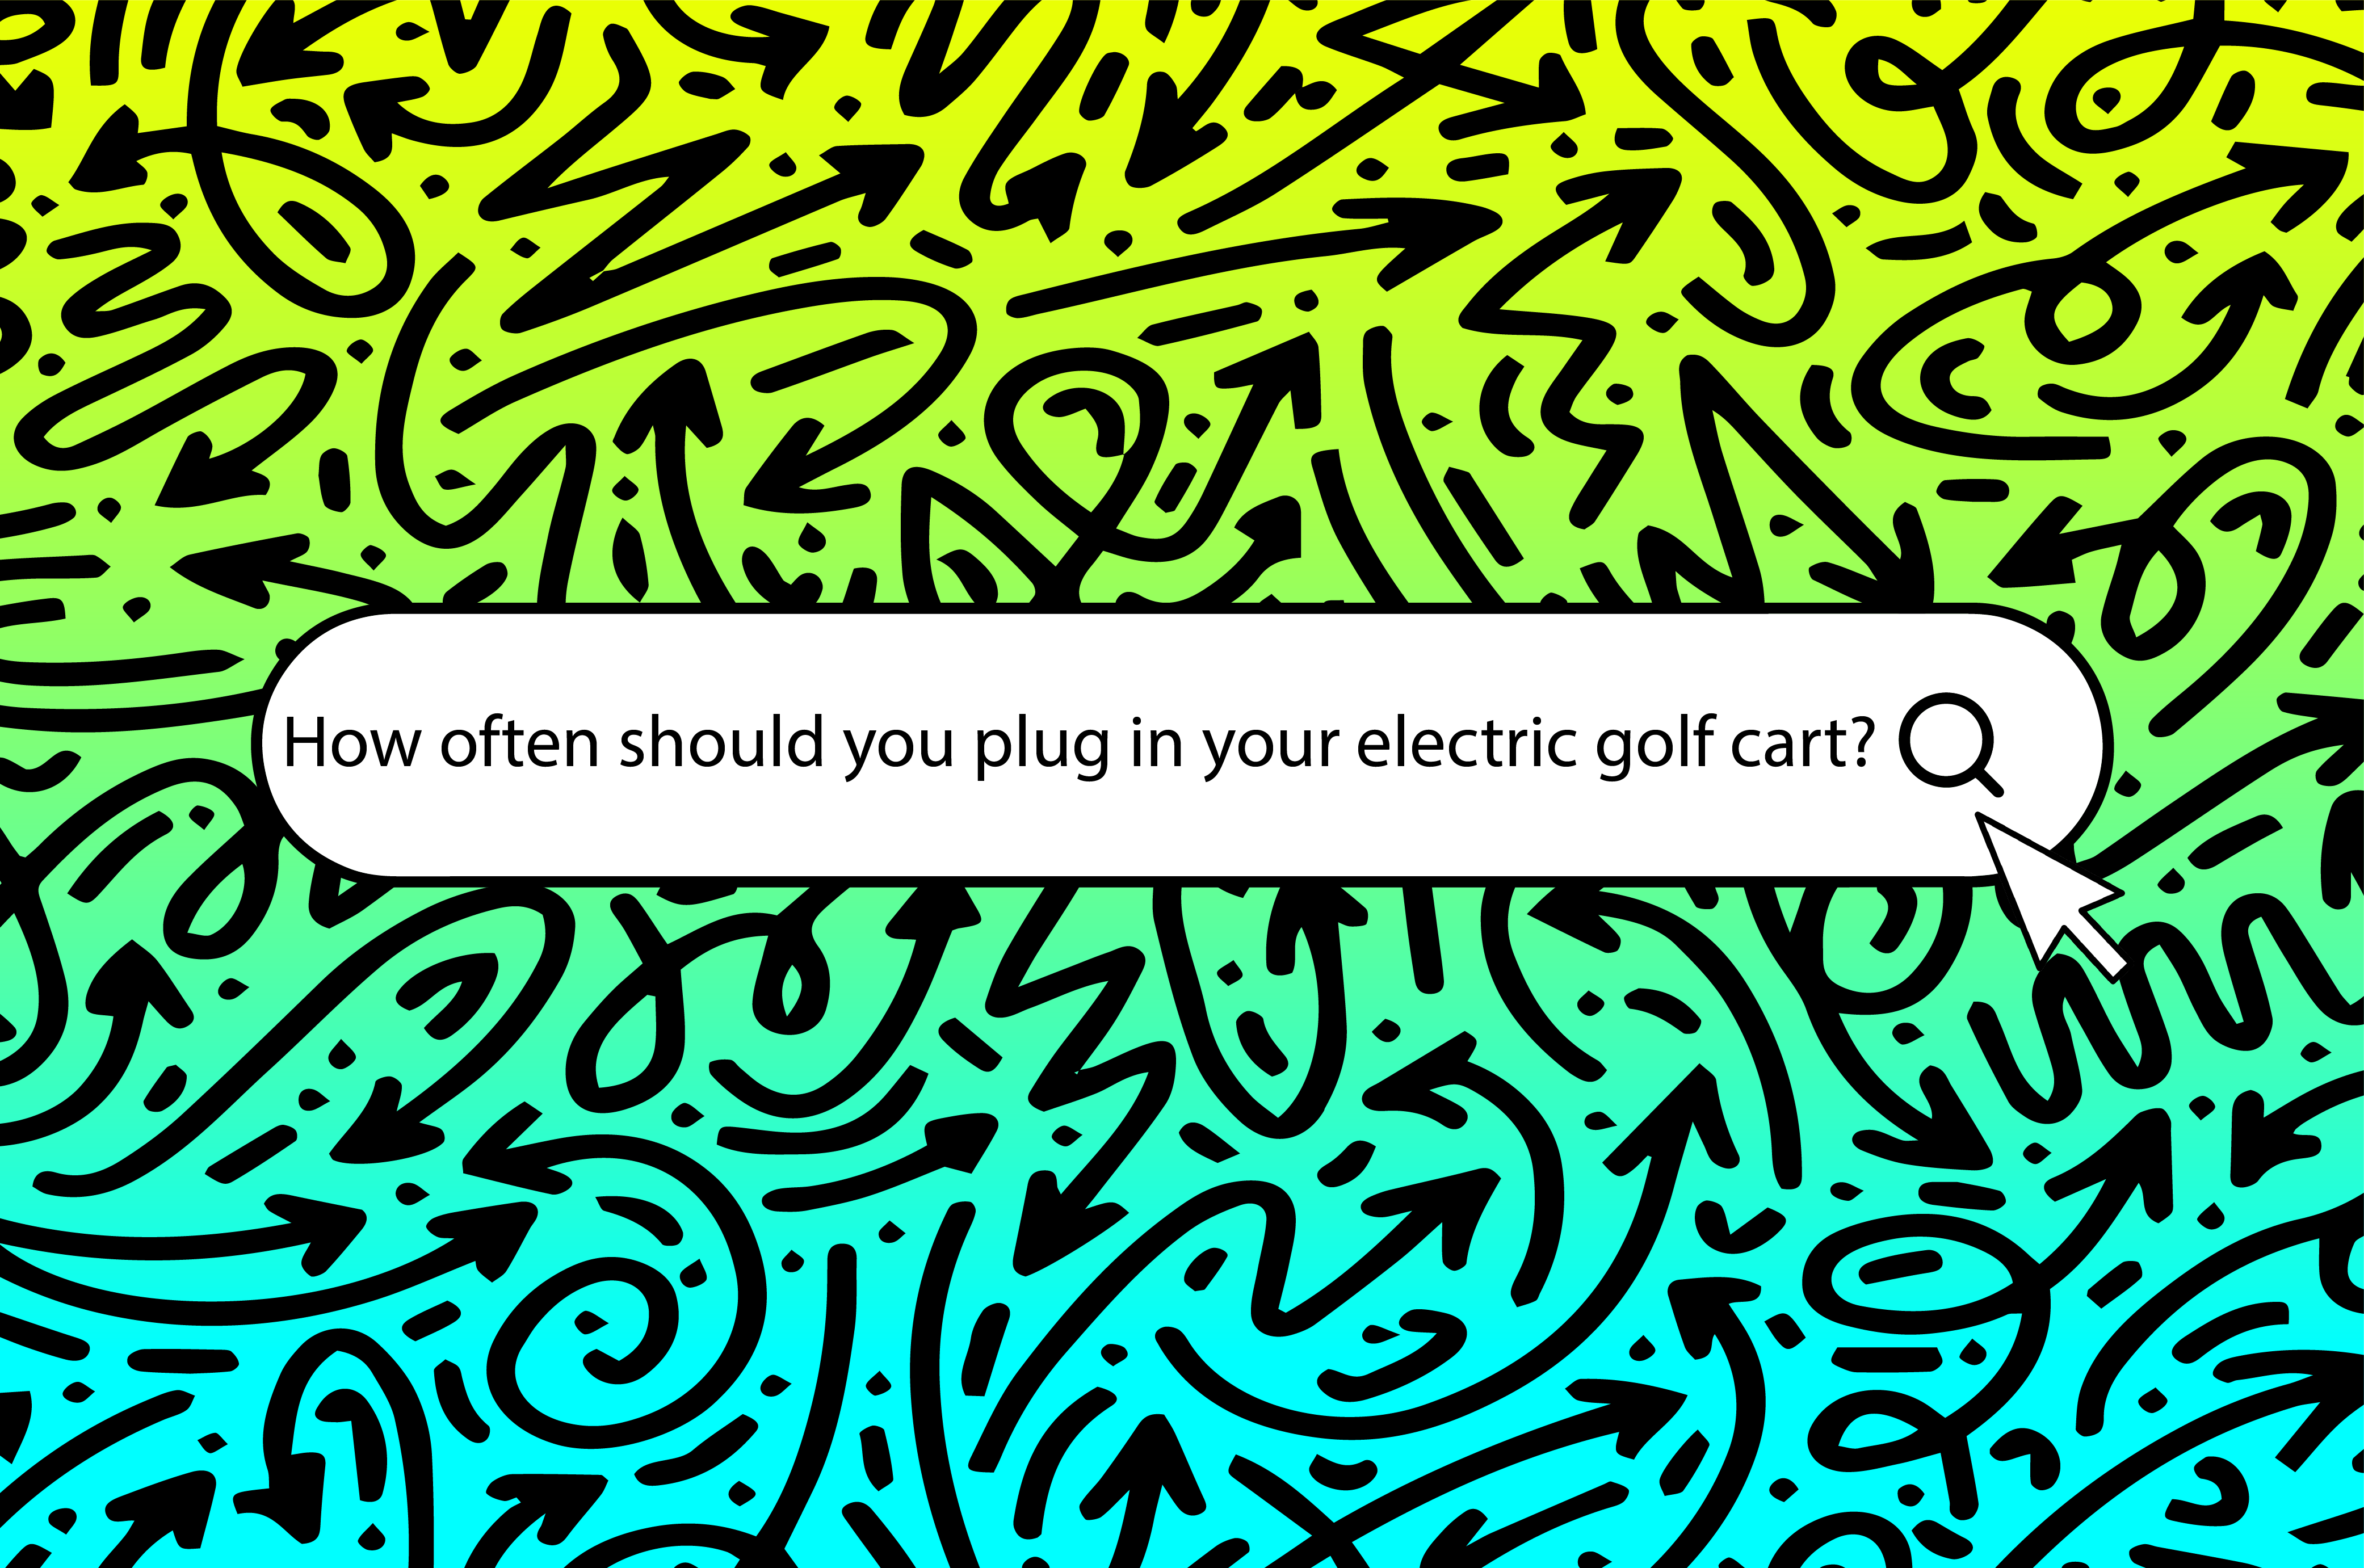 How often should you plug in your electric golf cart?